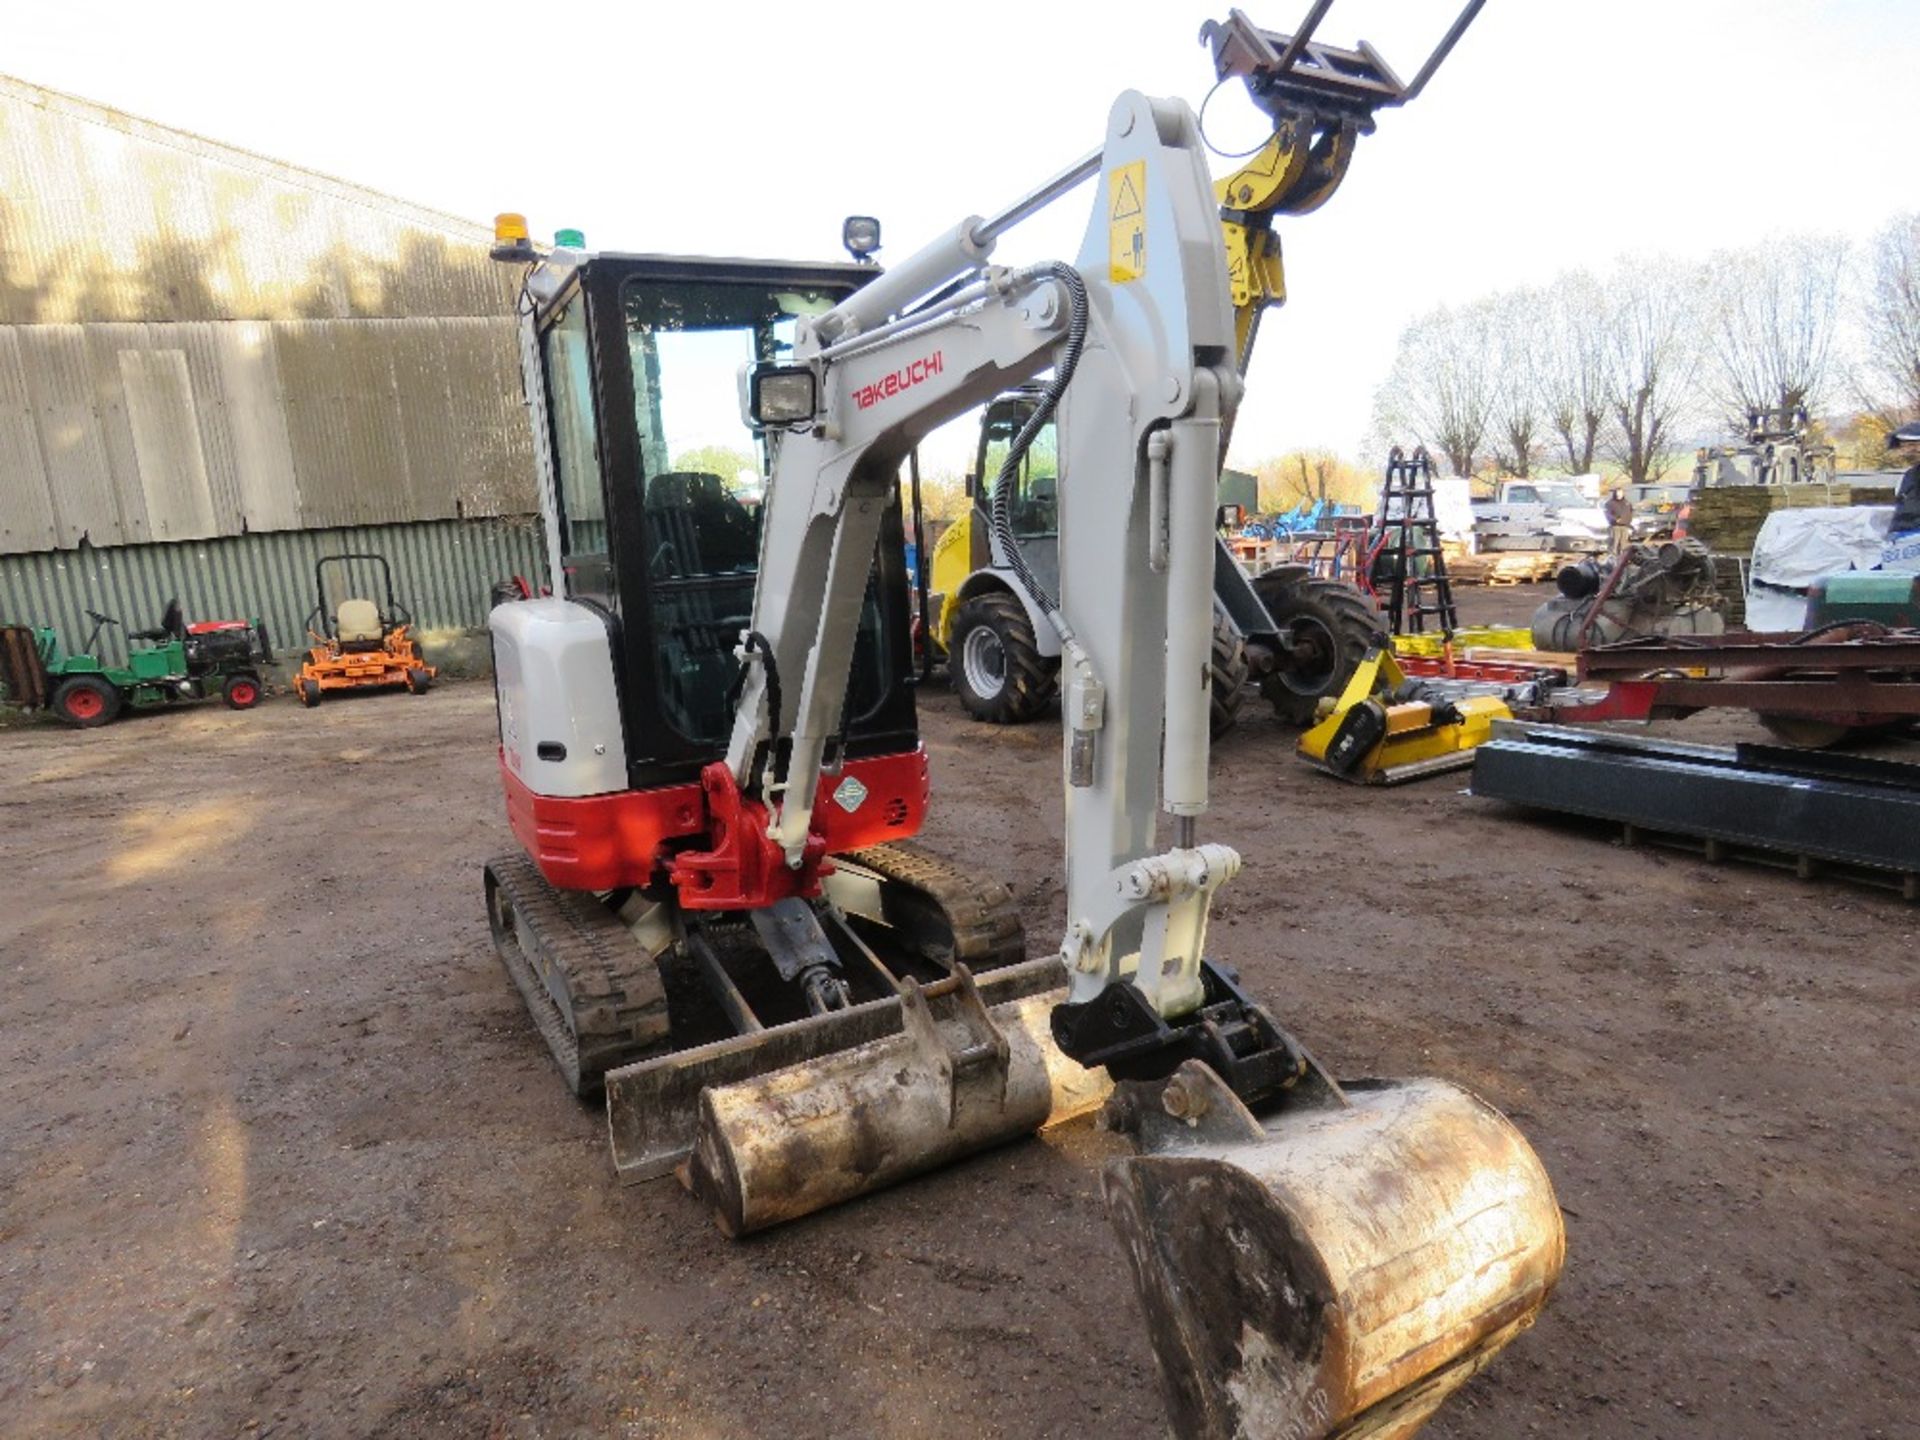 TAKEUCHI TB23R ZERO SWING EXCAVATOR, YEAR 2019. 1243 REC HOURS. 2 X BUCKETS. 2670KG OPERATING WEIGHT - Image 2 of 10